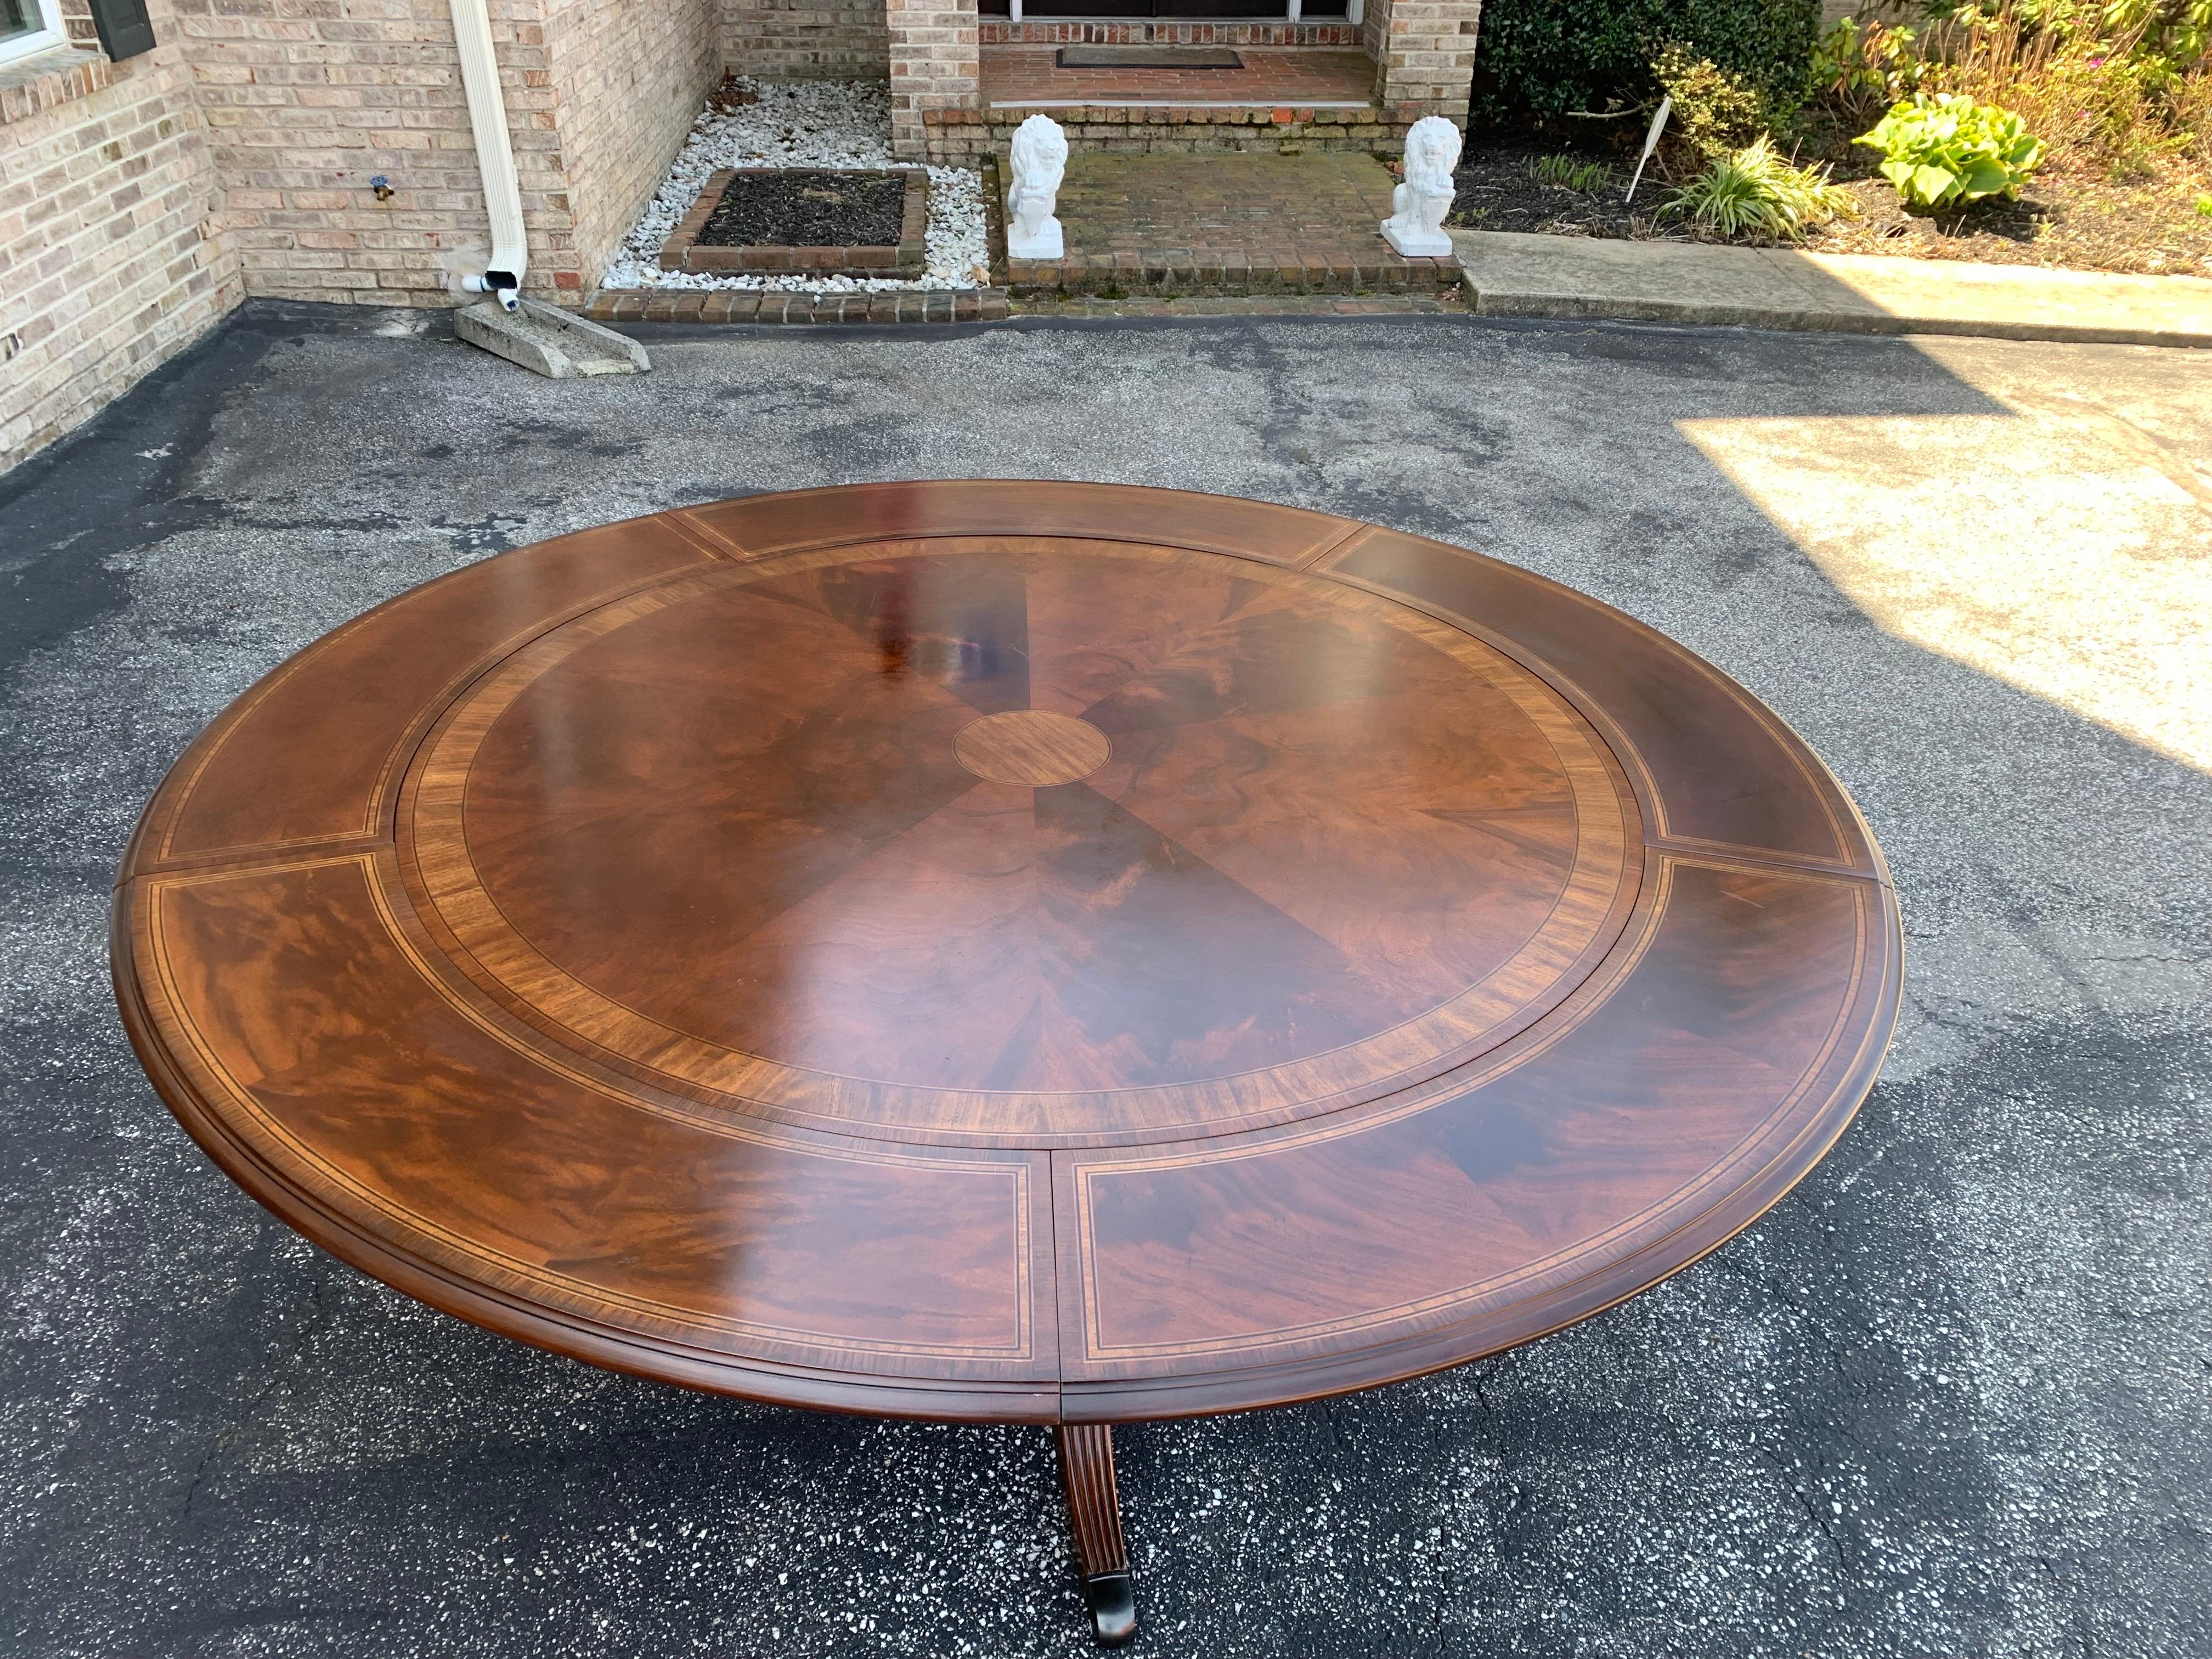 Mahogany Round Dining Table with Perimeter Leaves Oversized 2